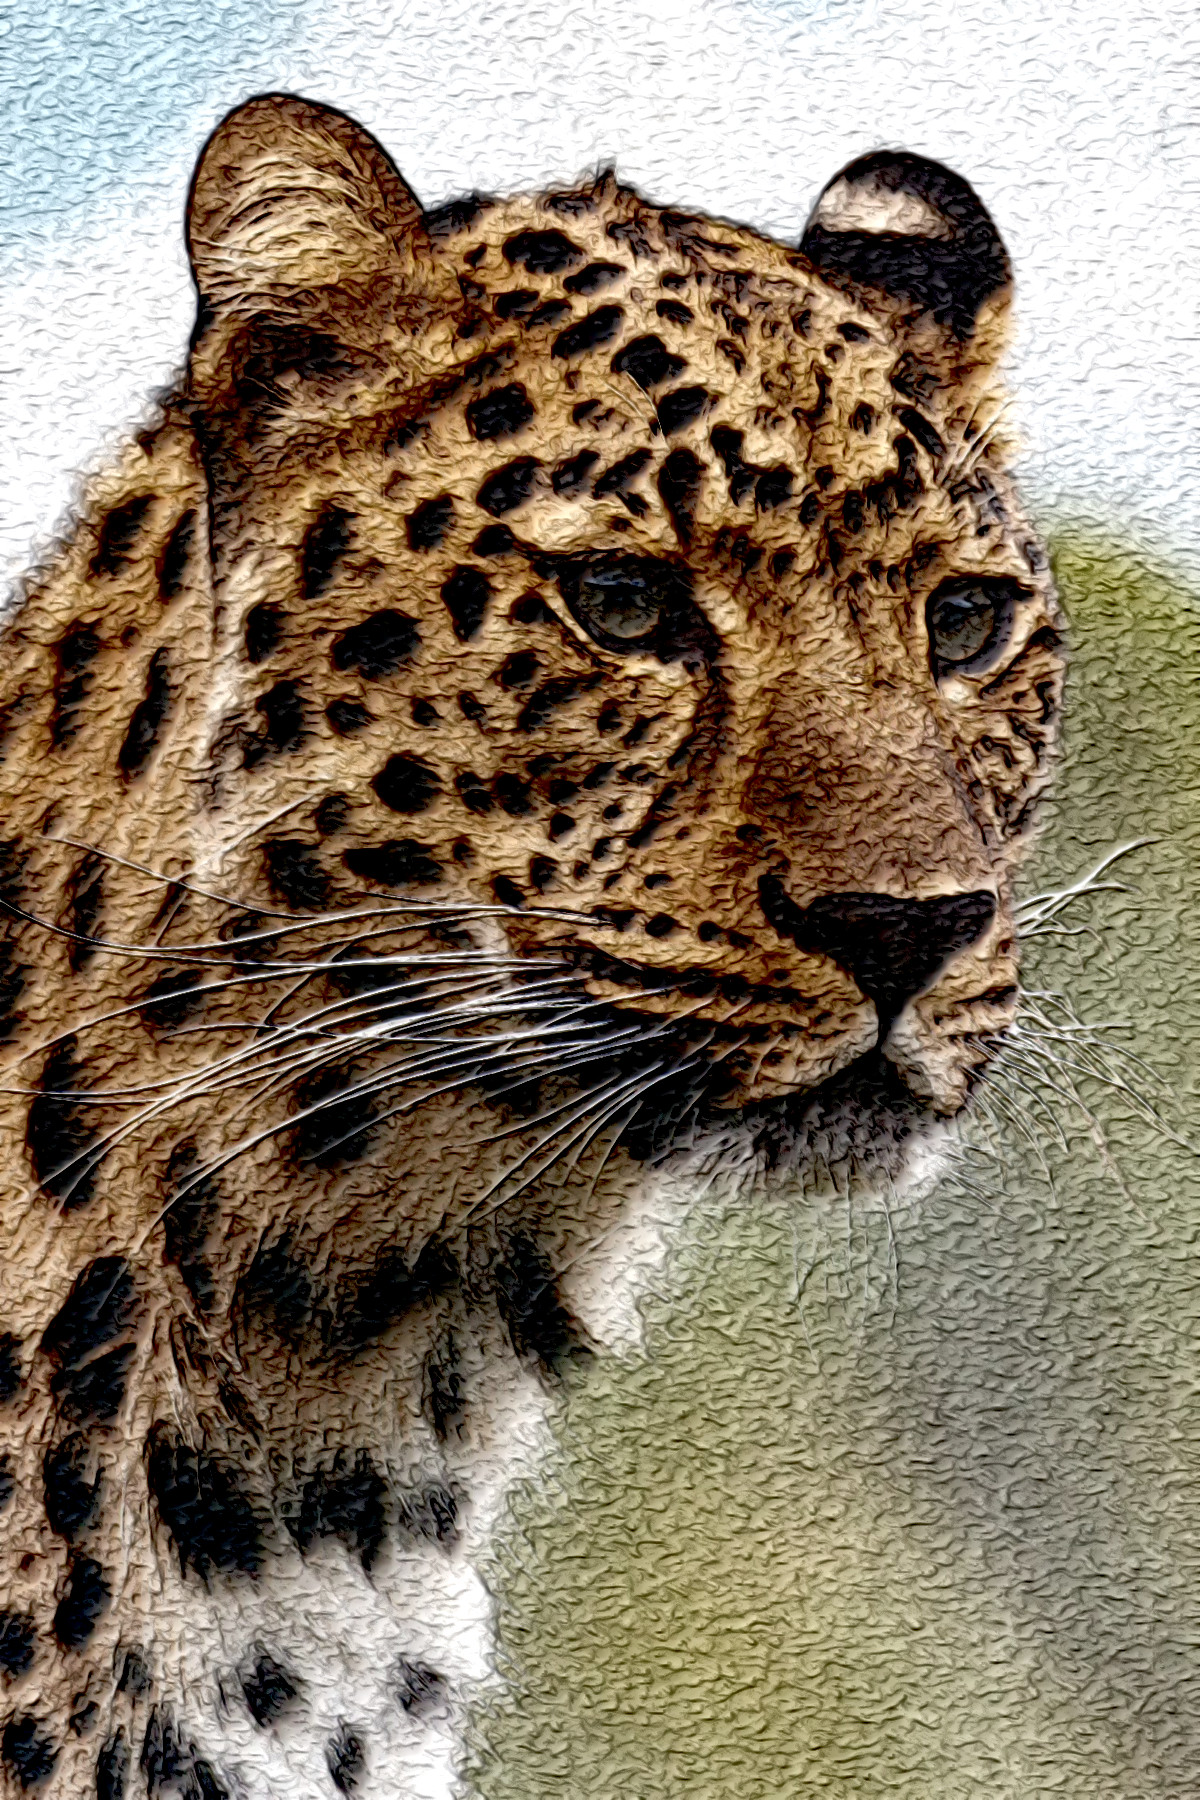 2021-04-28 09-51-47 cheetah-leopard-animal-big-87403 with effect B (MeanCurvature+Neon), option colours (noised) (normal texture) and edges=medium.jpeg